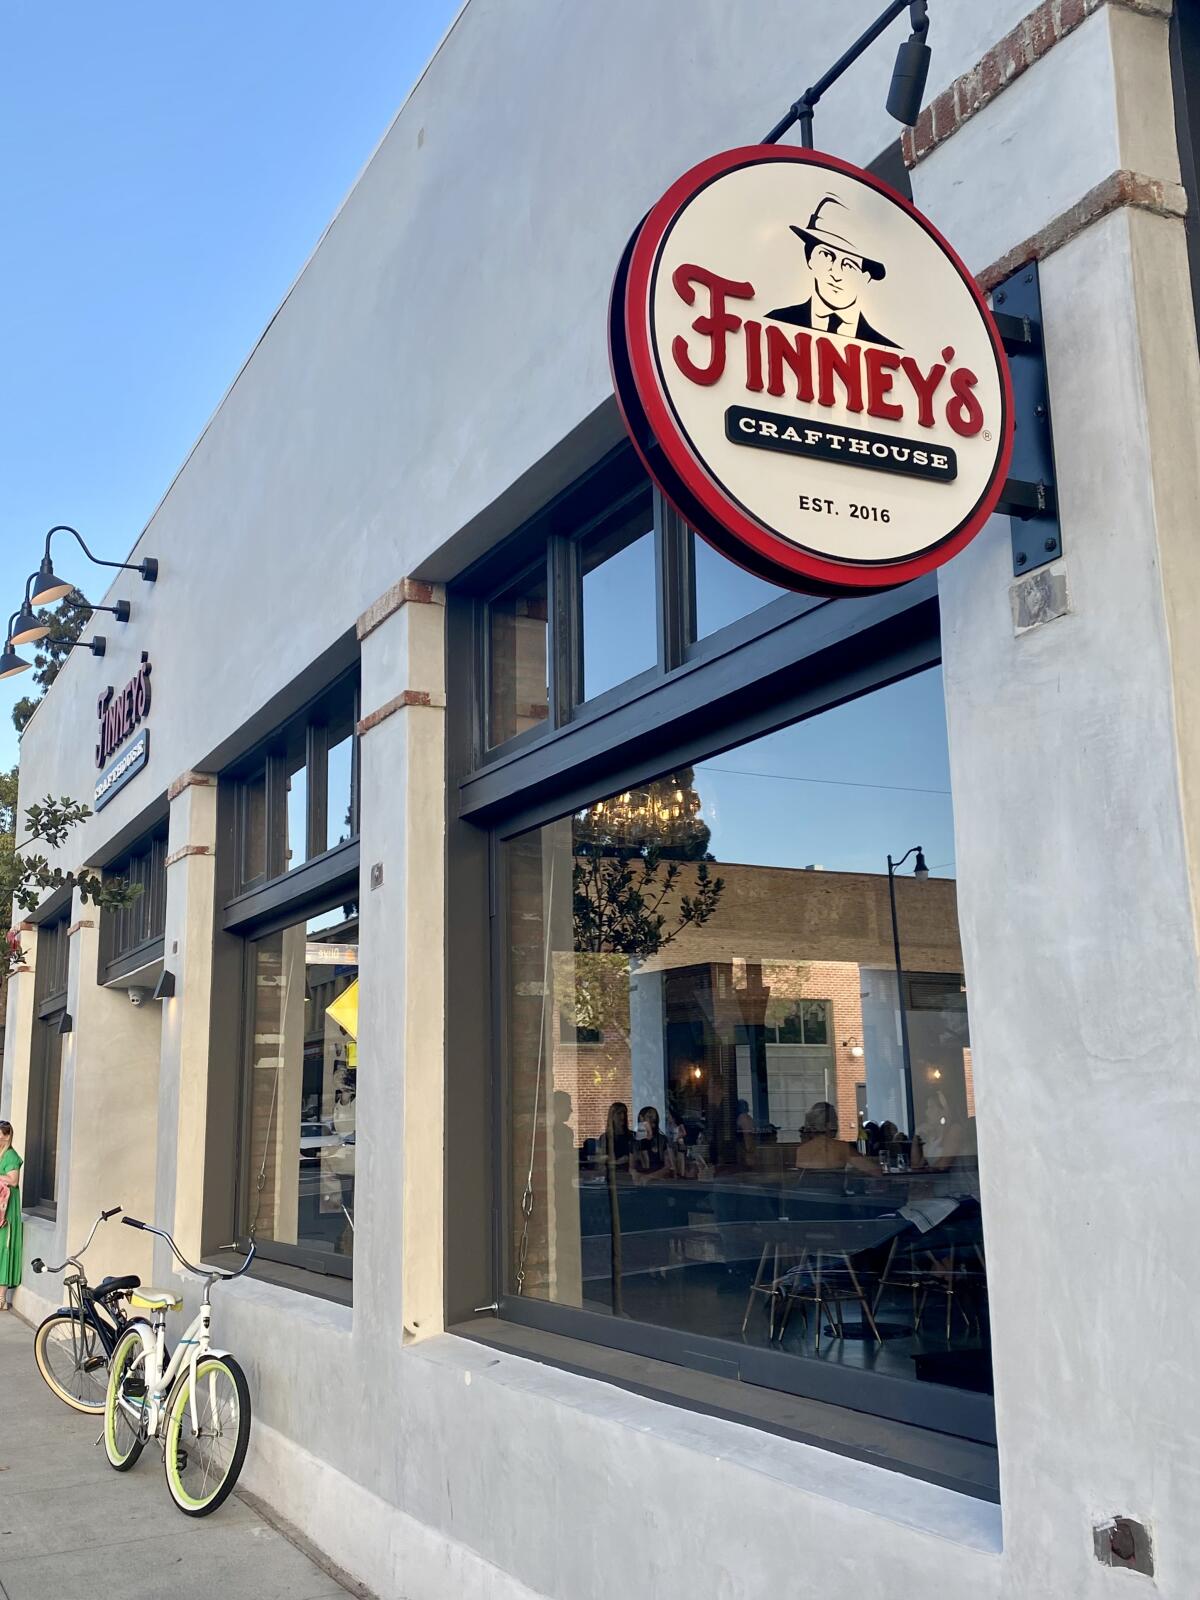 Finney's Crafthouse opened its seventh location July 6 on West Chapman in Old Towne Orange.